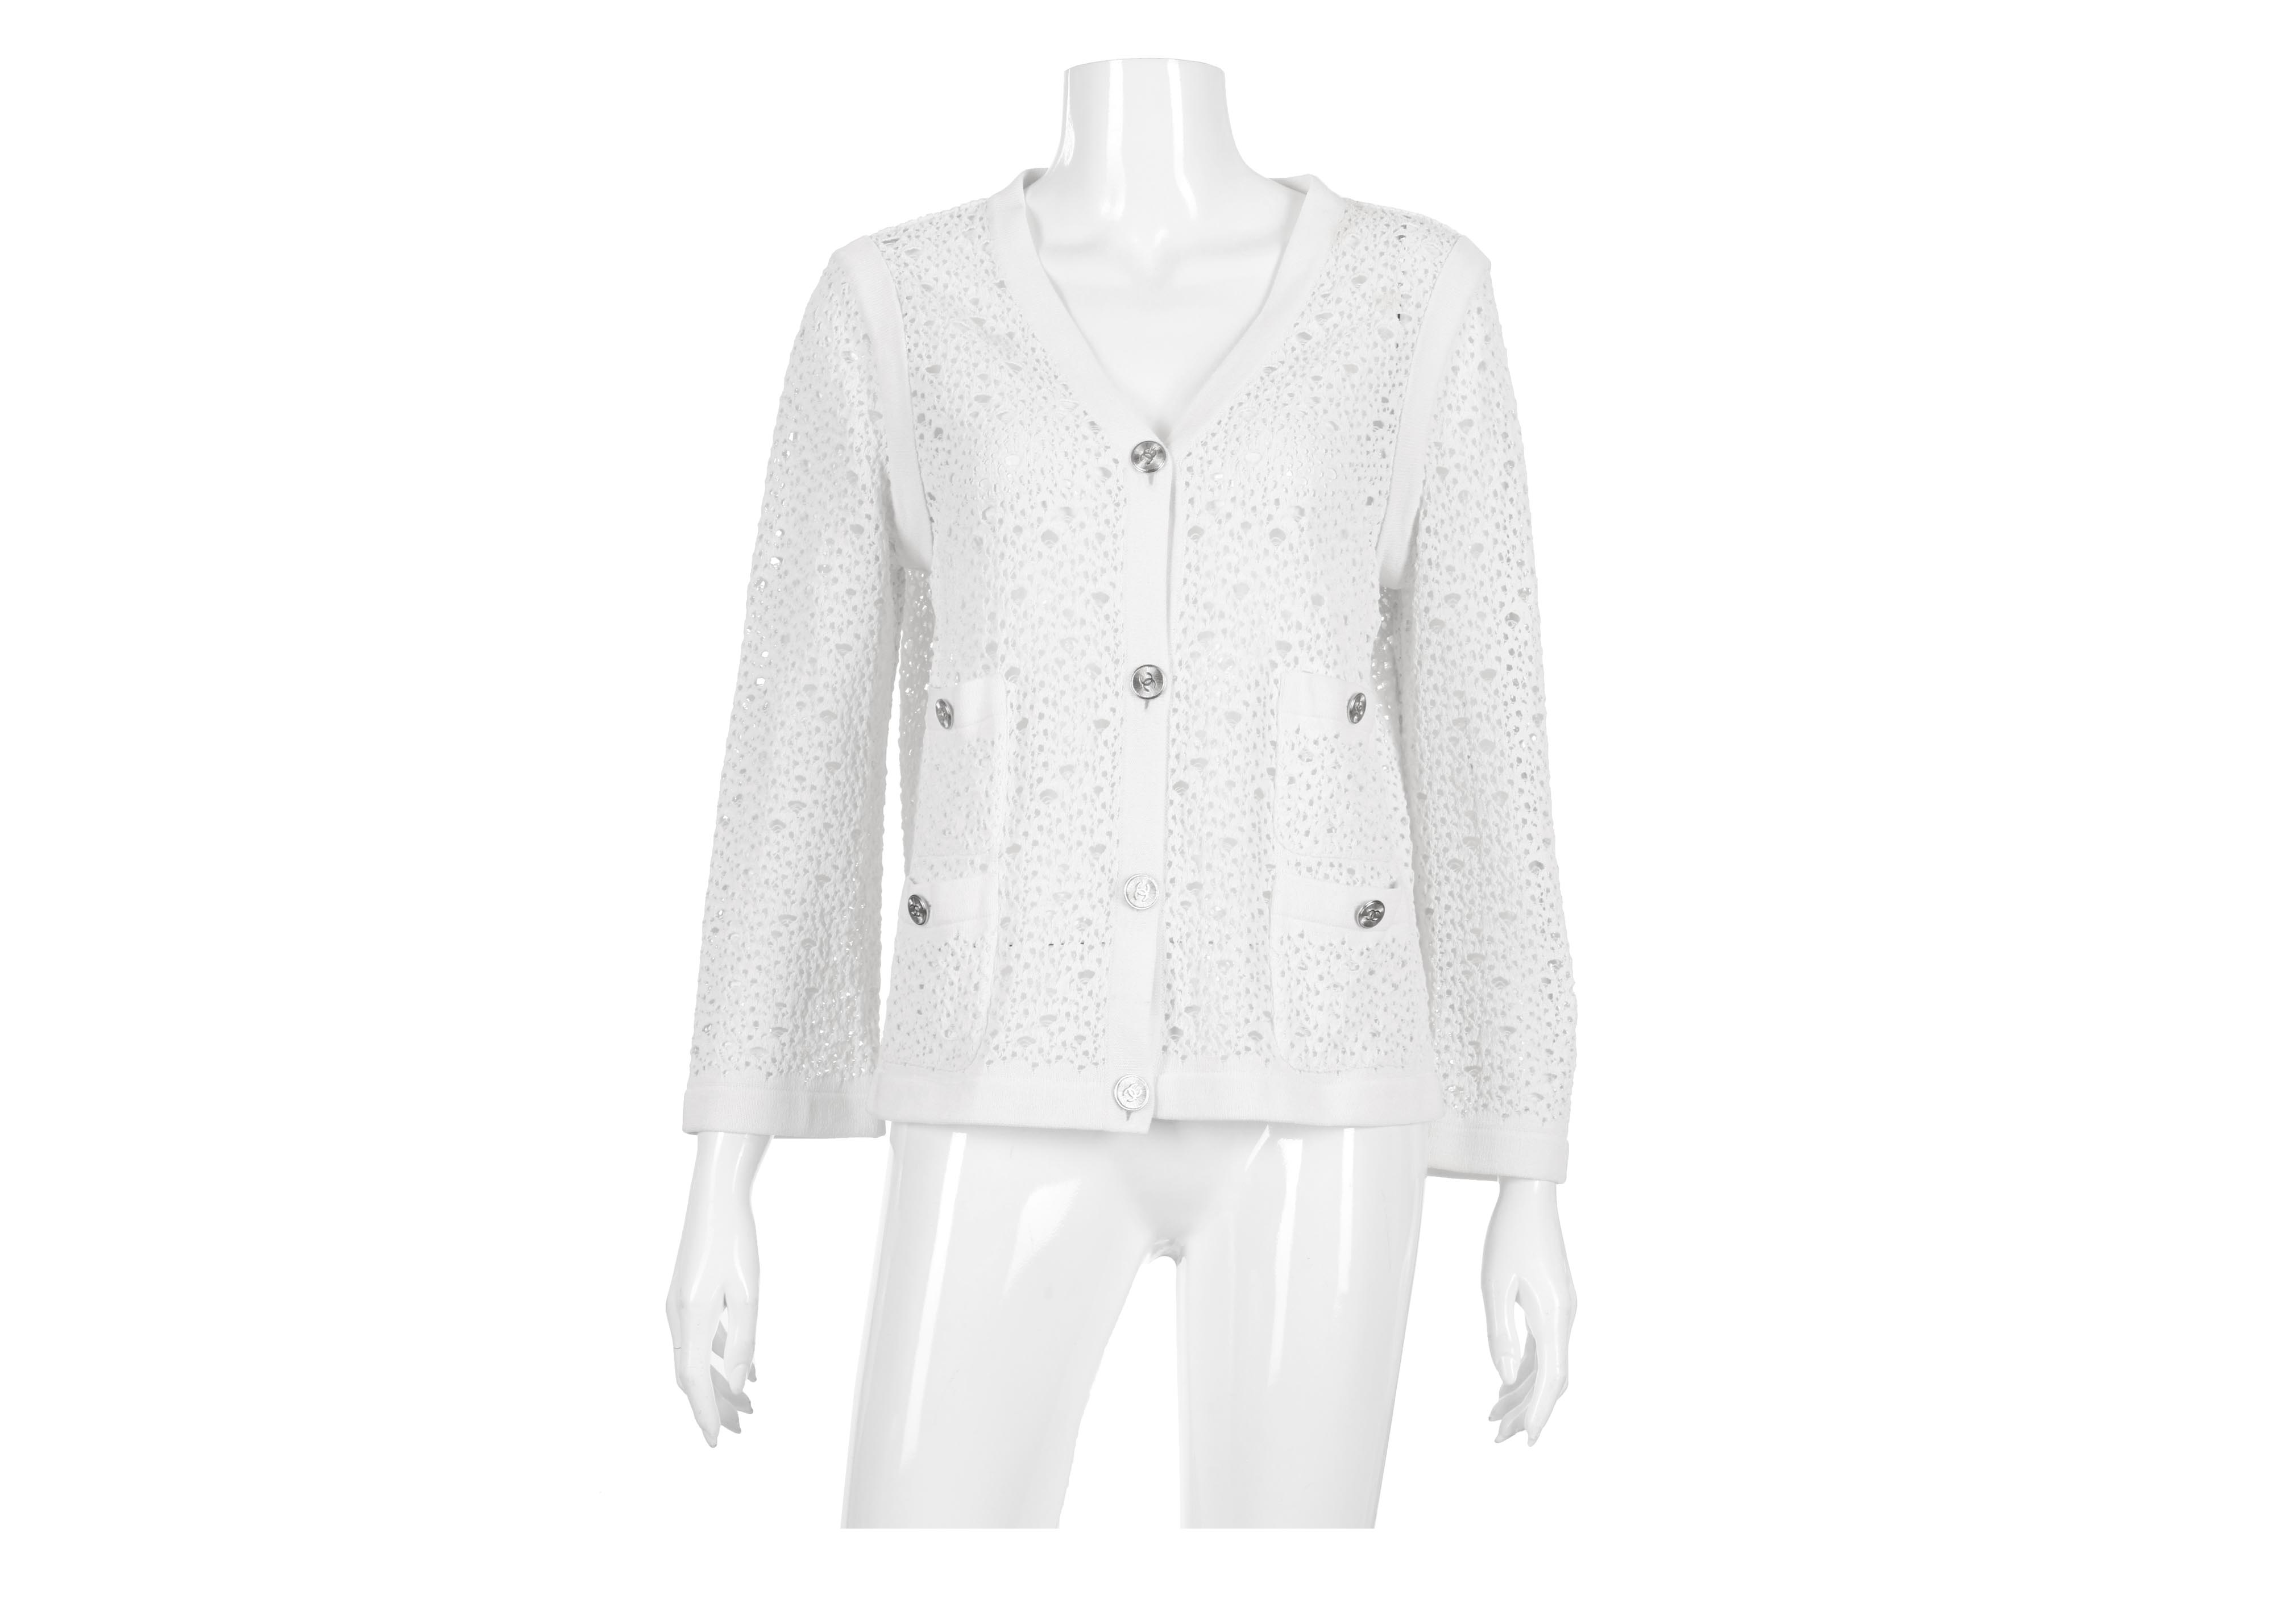 Chanel white crochet knit cropped cardigan 34 at Jill's Consignment